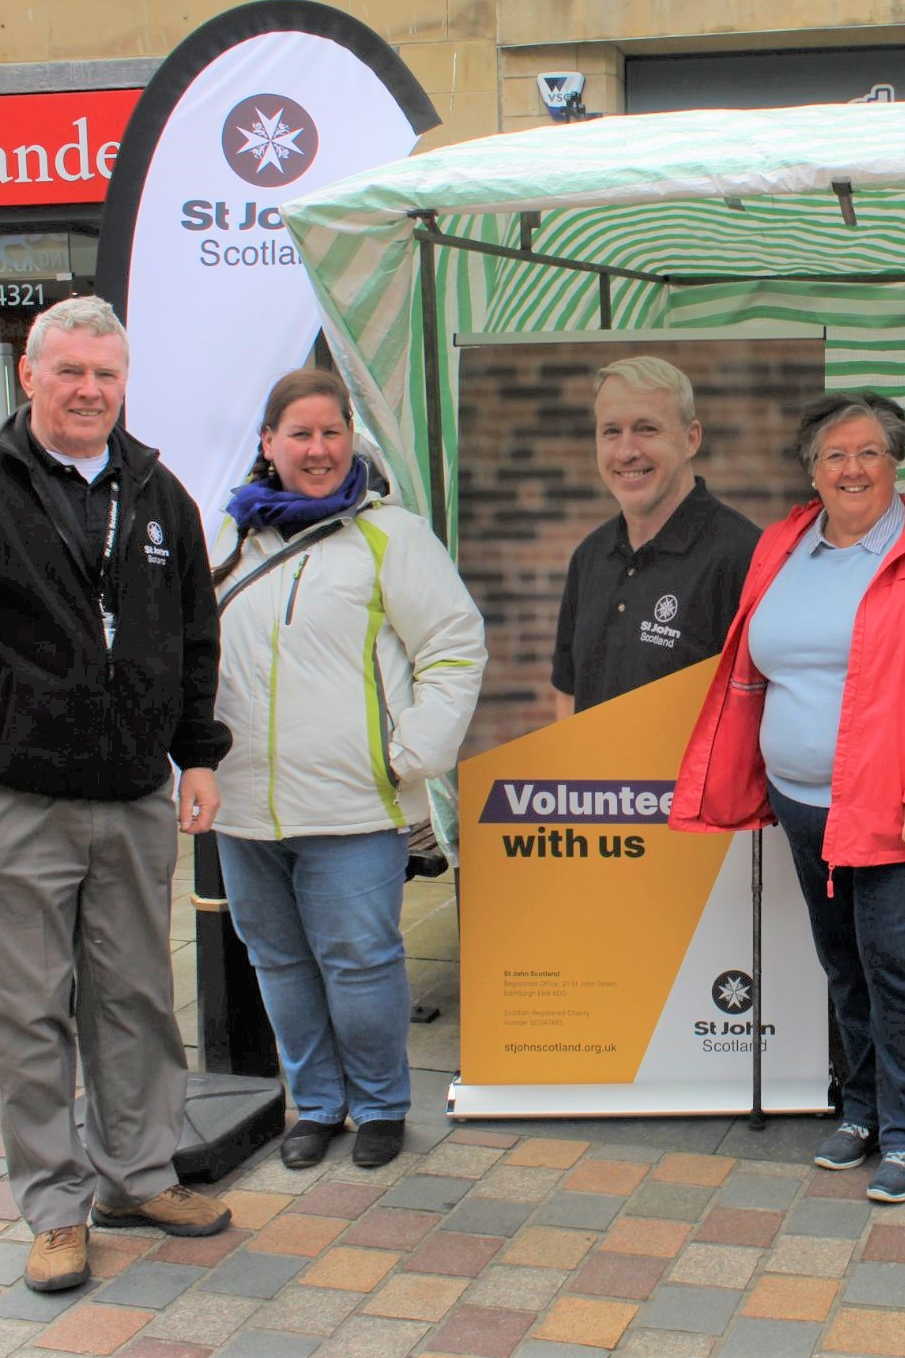 A group of three volunteers pose in front of a pop up banner and stand